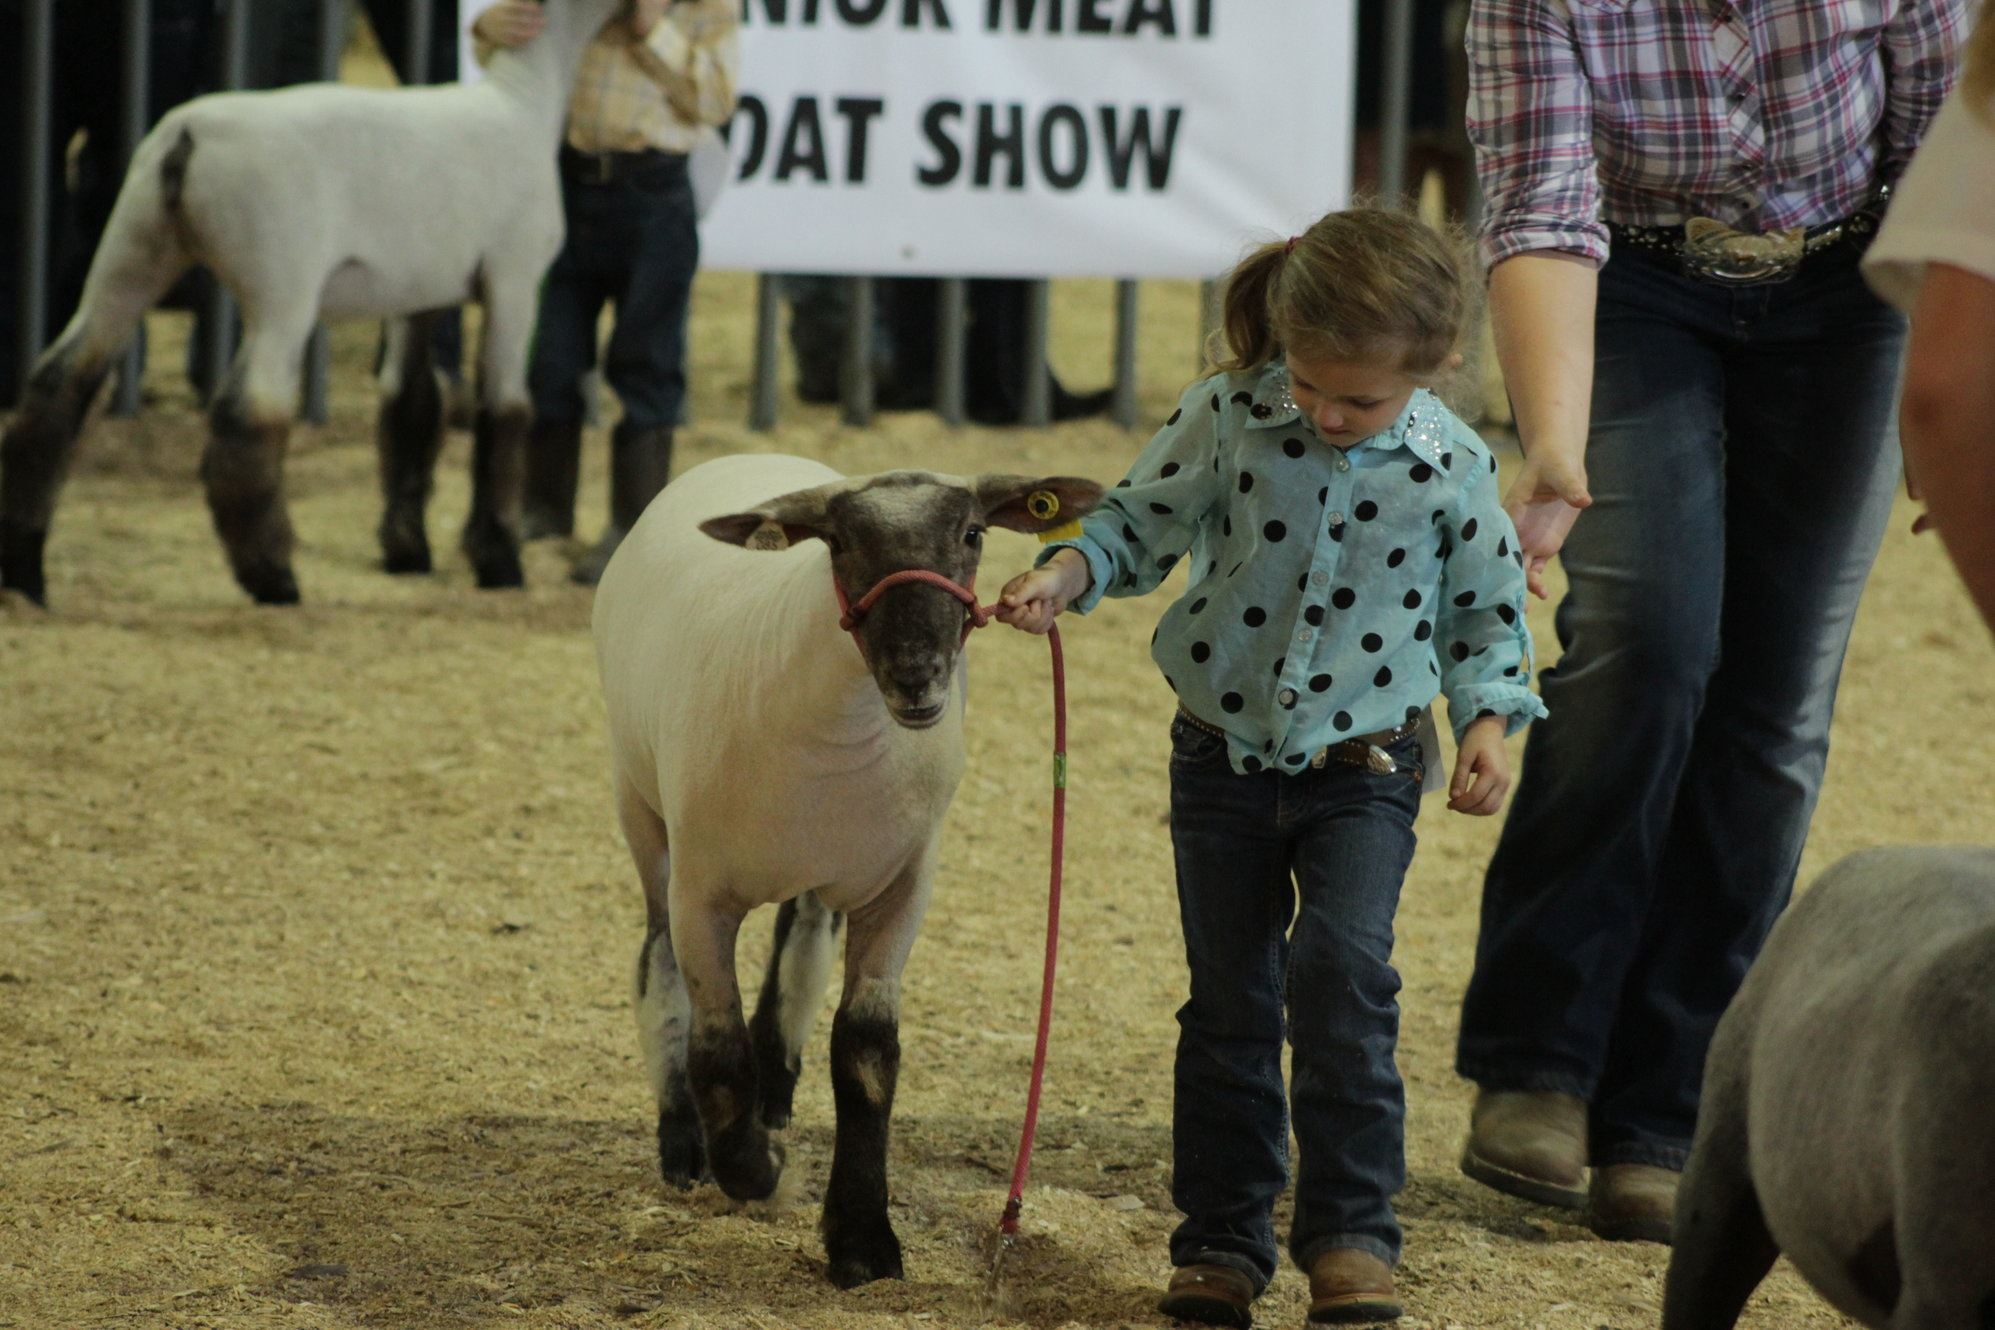 A young child leads a sheep on a rope lead.